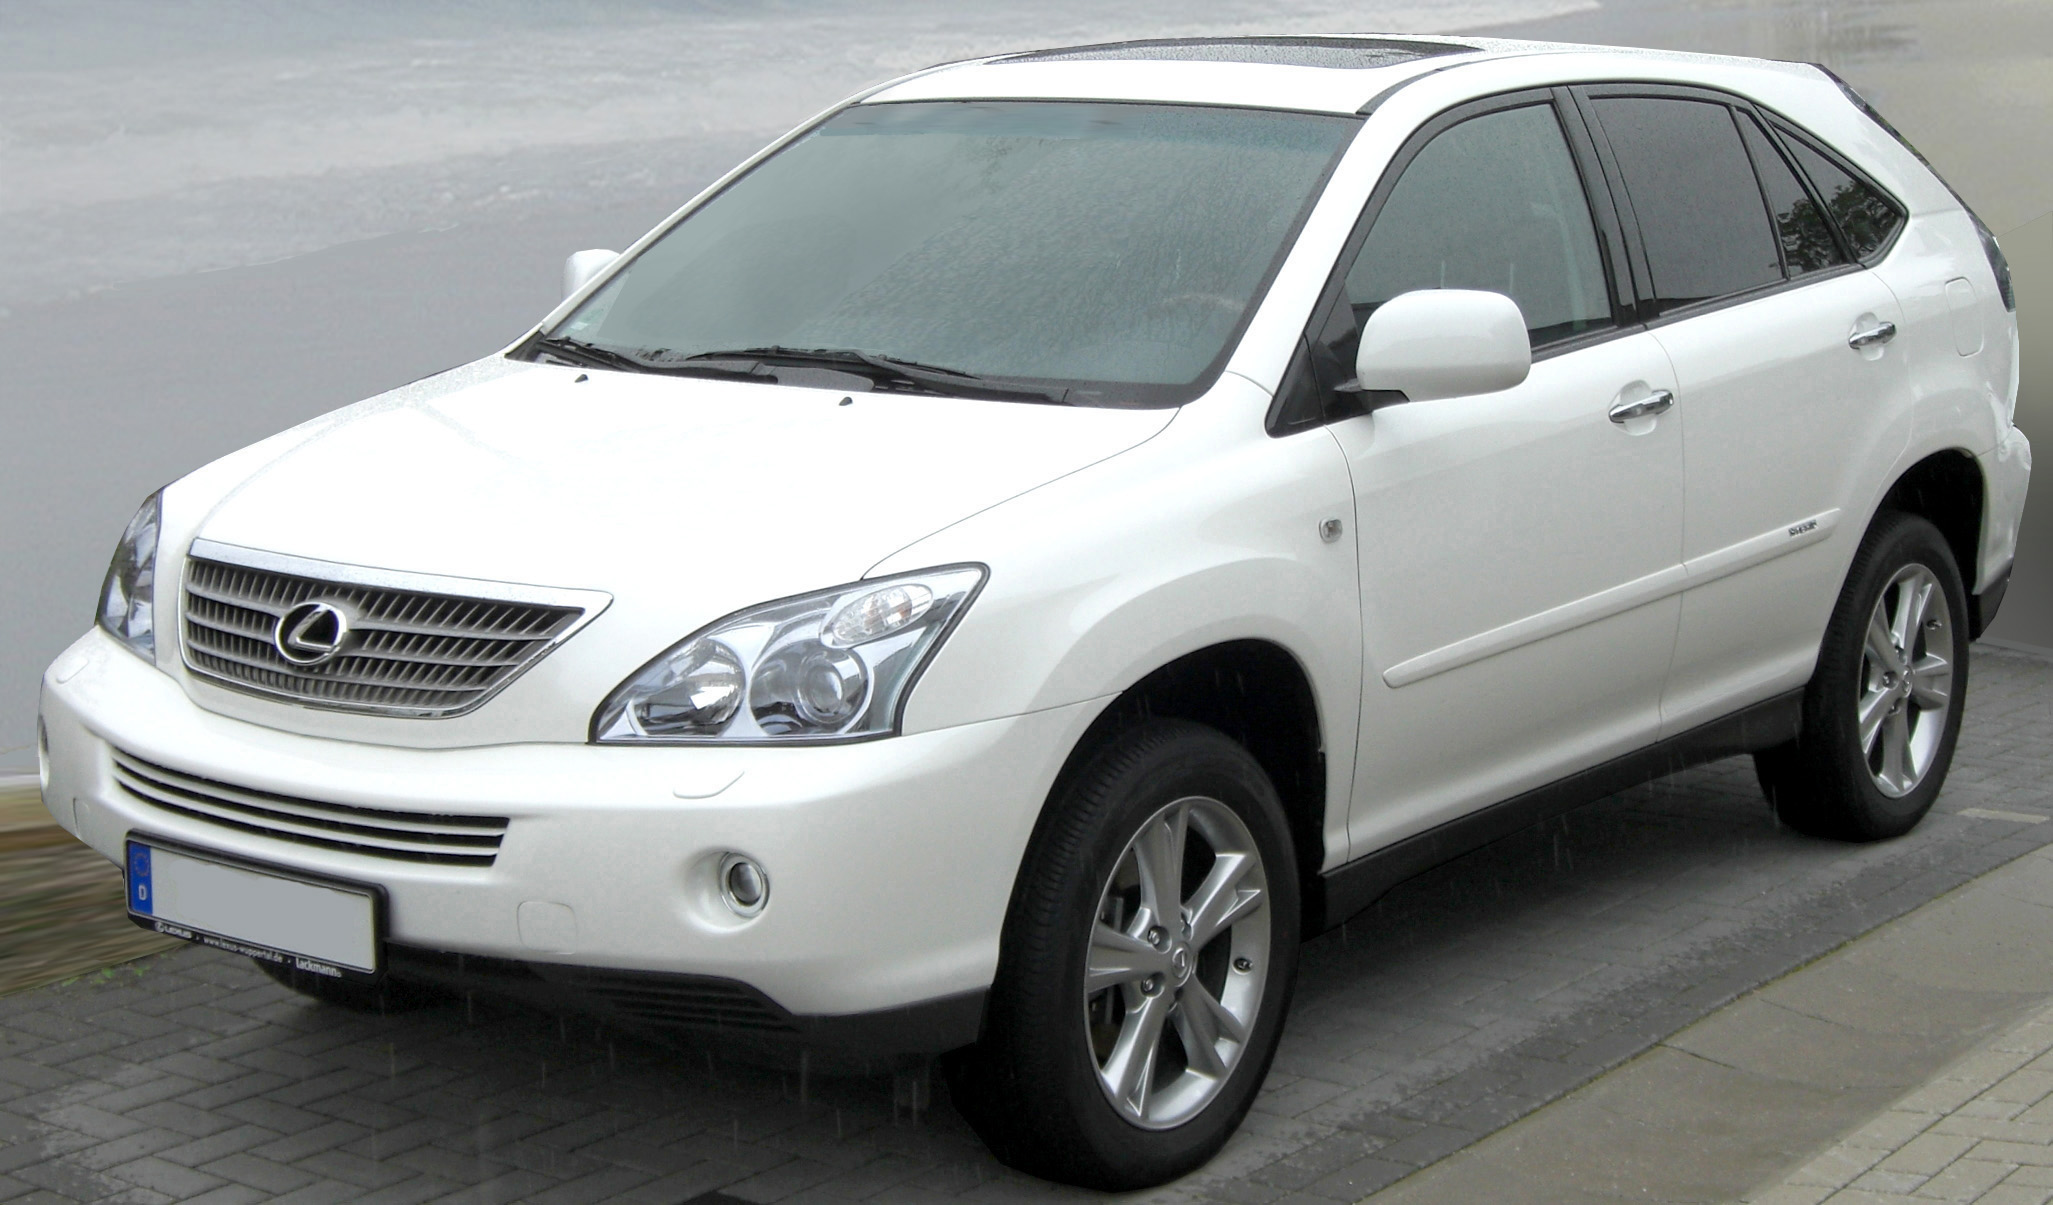 File:Lexus-RX400h Crystal White Mica.jpg - Wikimedia Commons